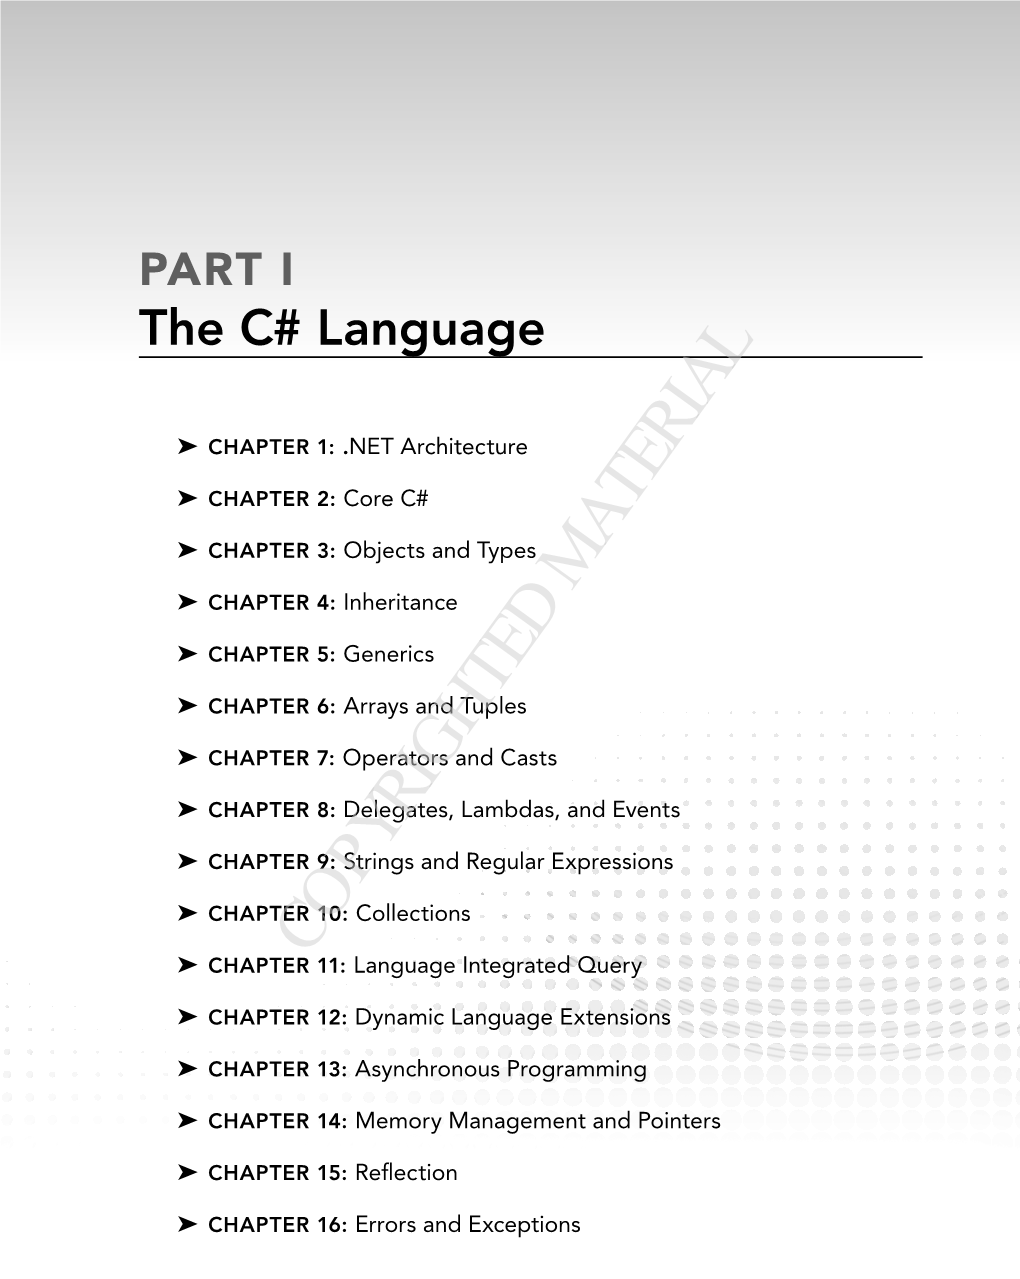 COPYRIGHTED MATERIAL ➤➤ Chapter 11: Language Integrated Query